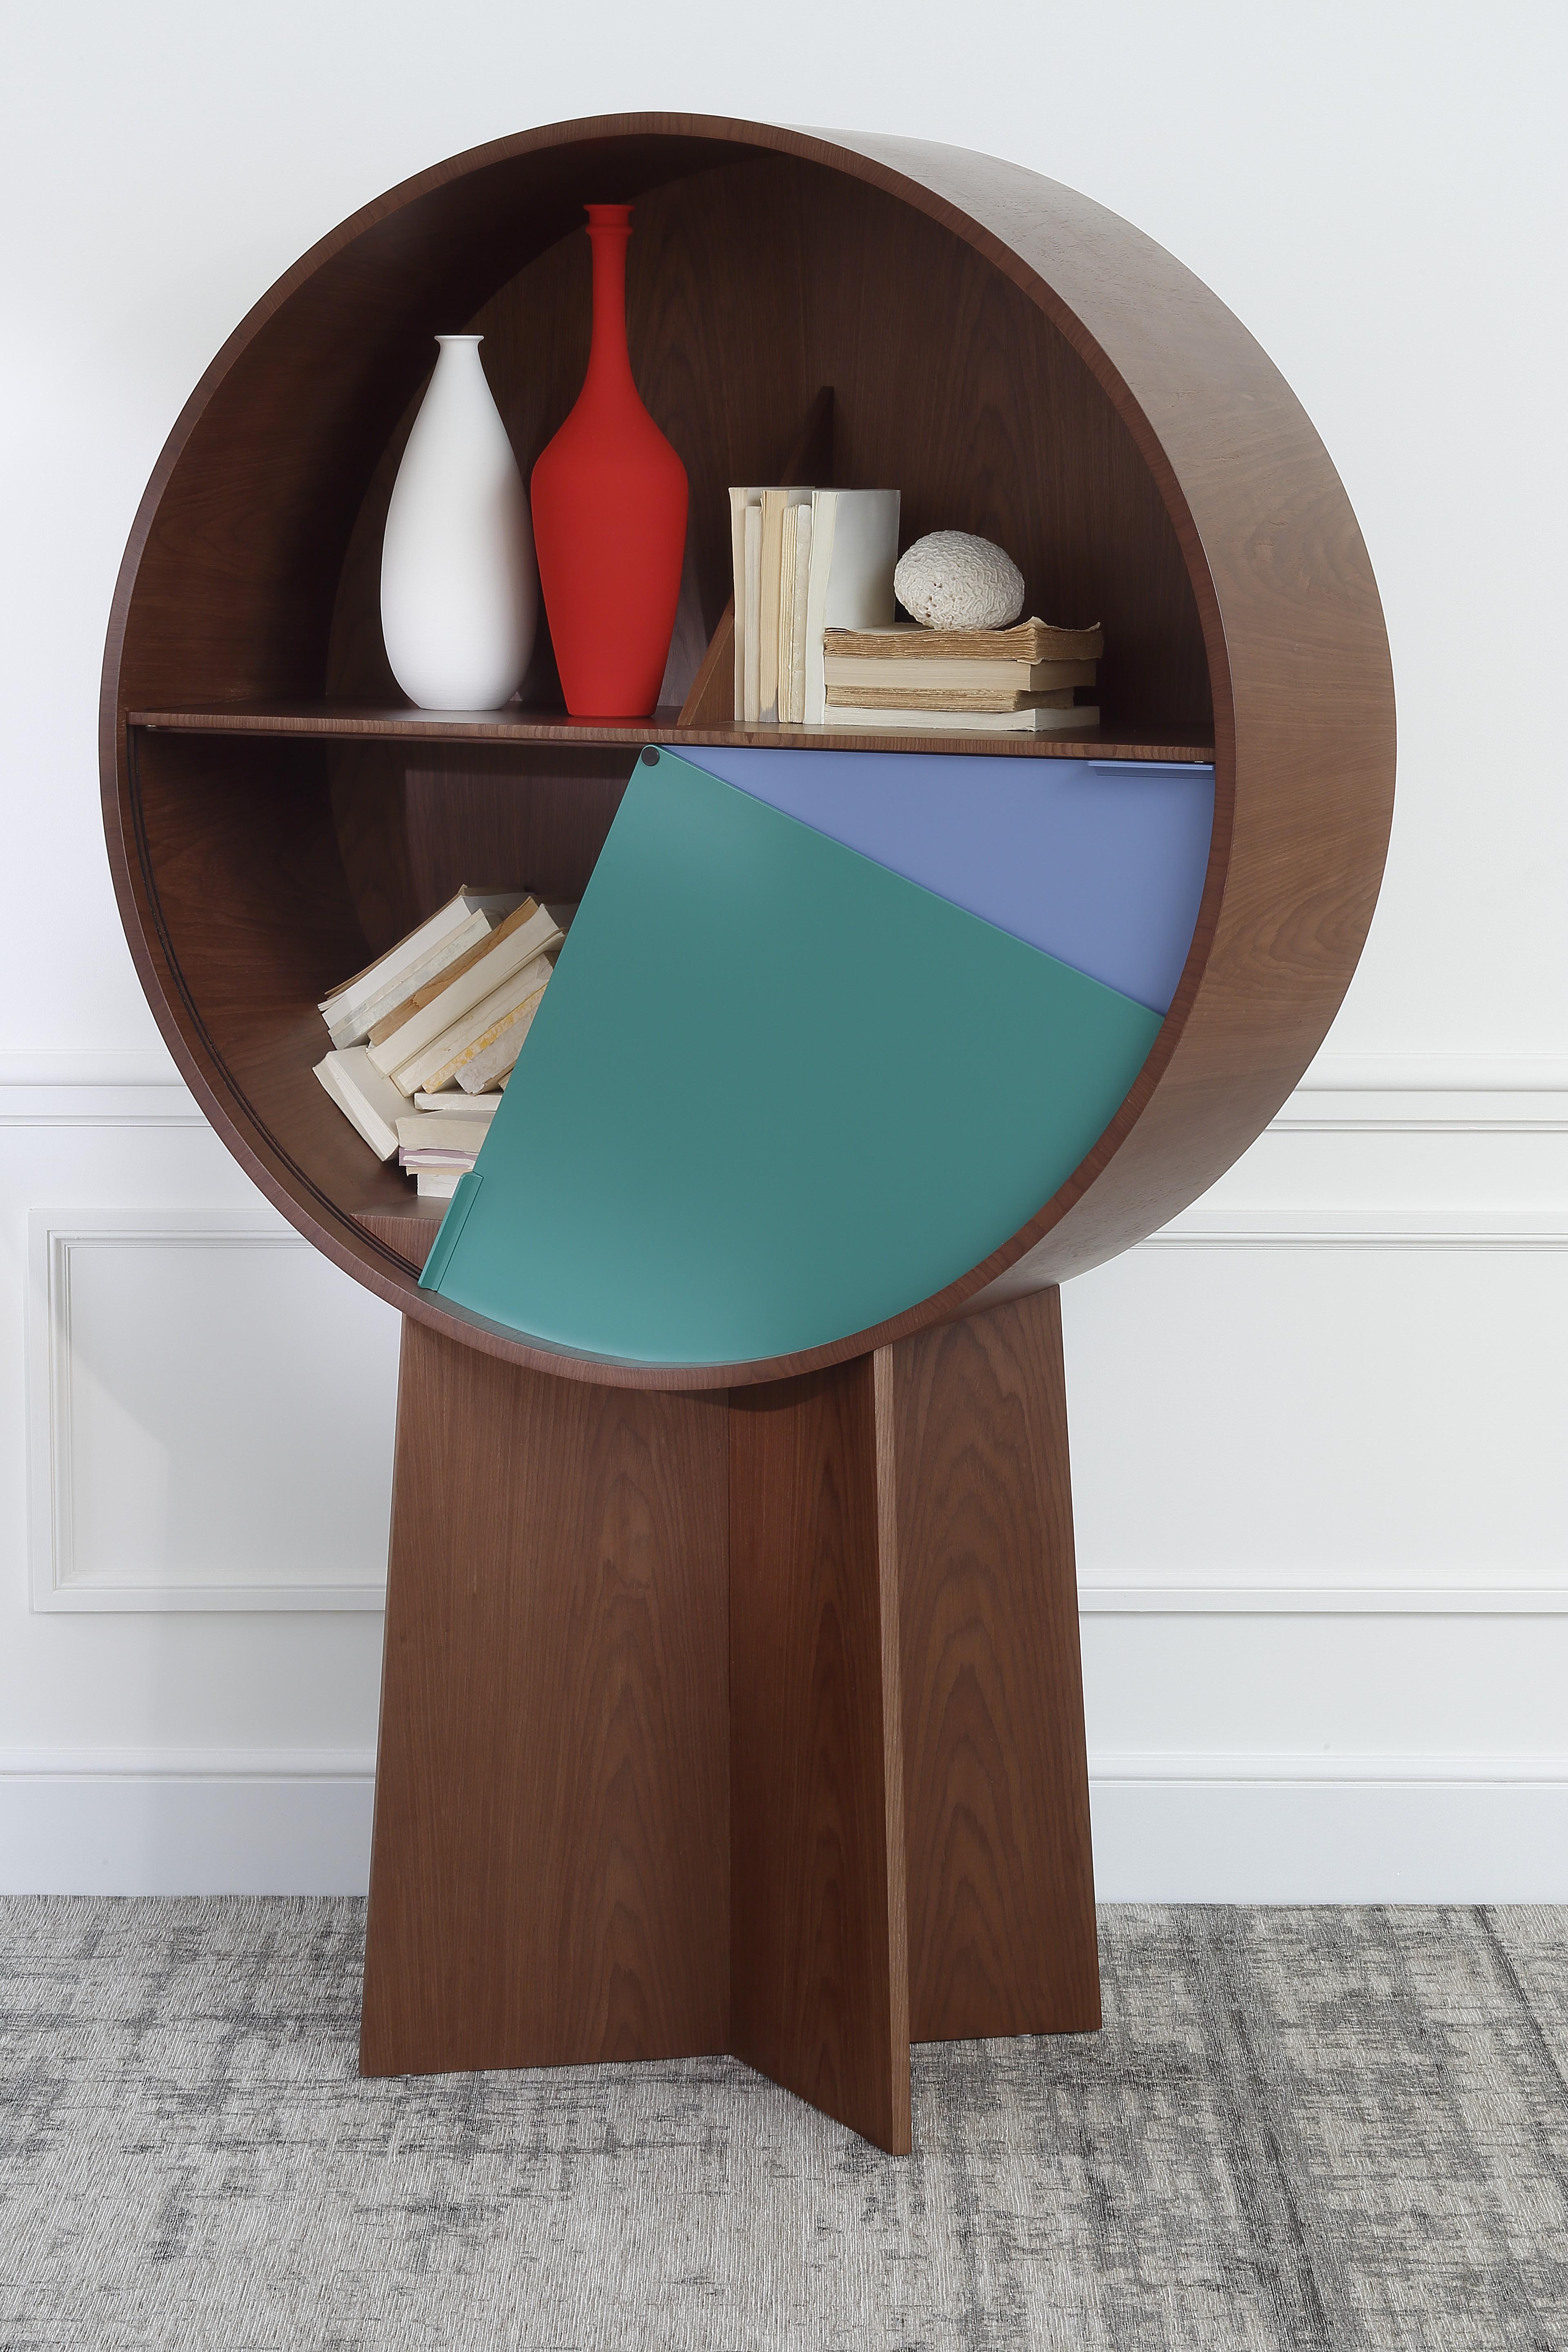 Walnut Luna storage cabinet by Patricia Urquiola
Materials: Walnut veneer on medium, or orange lacquer on medium. 2 sliding doors in two-tone lacquered hemispheres or in varnished walnut veneer
Technique: Lacquered or natural wood. 
Dimensions: D